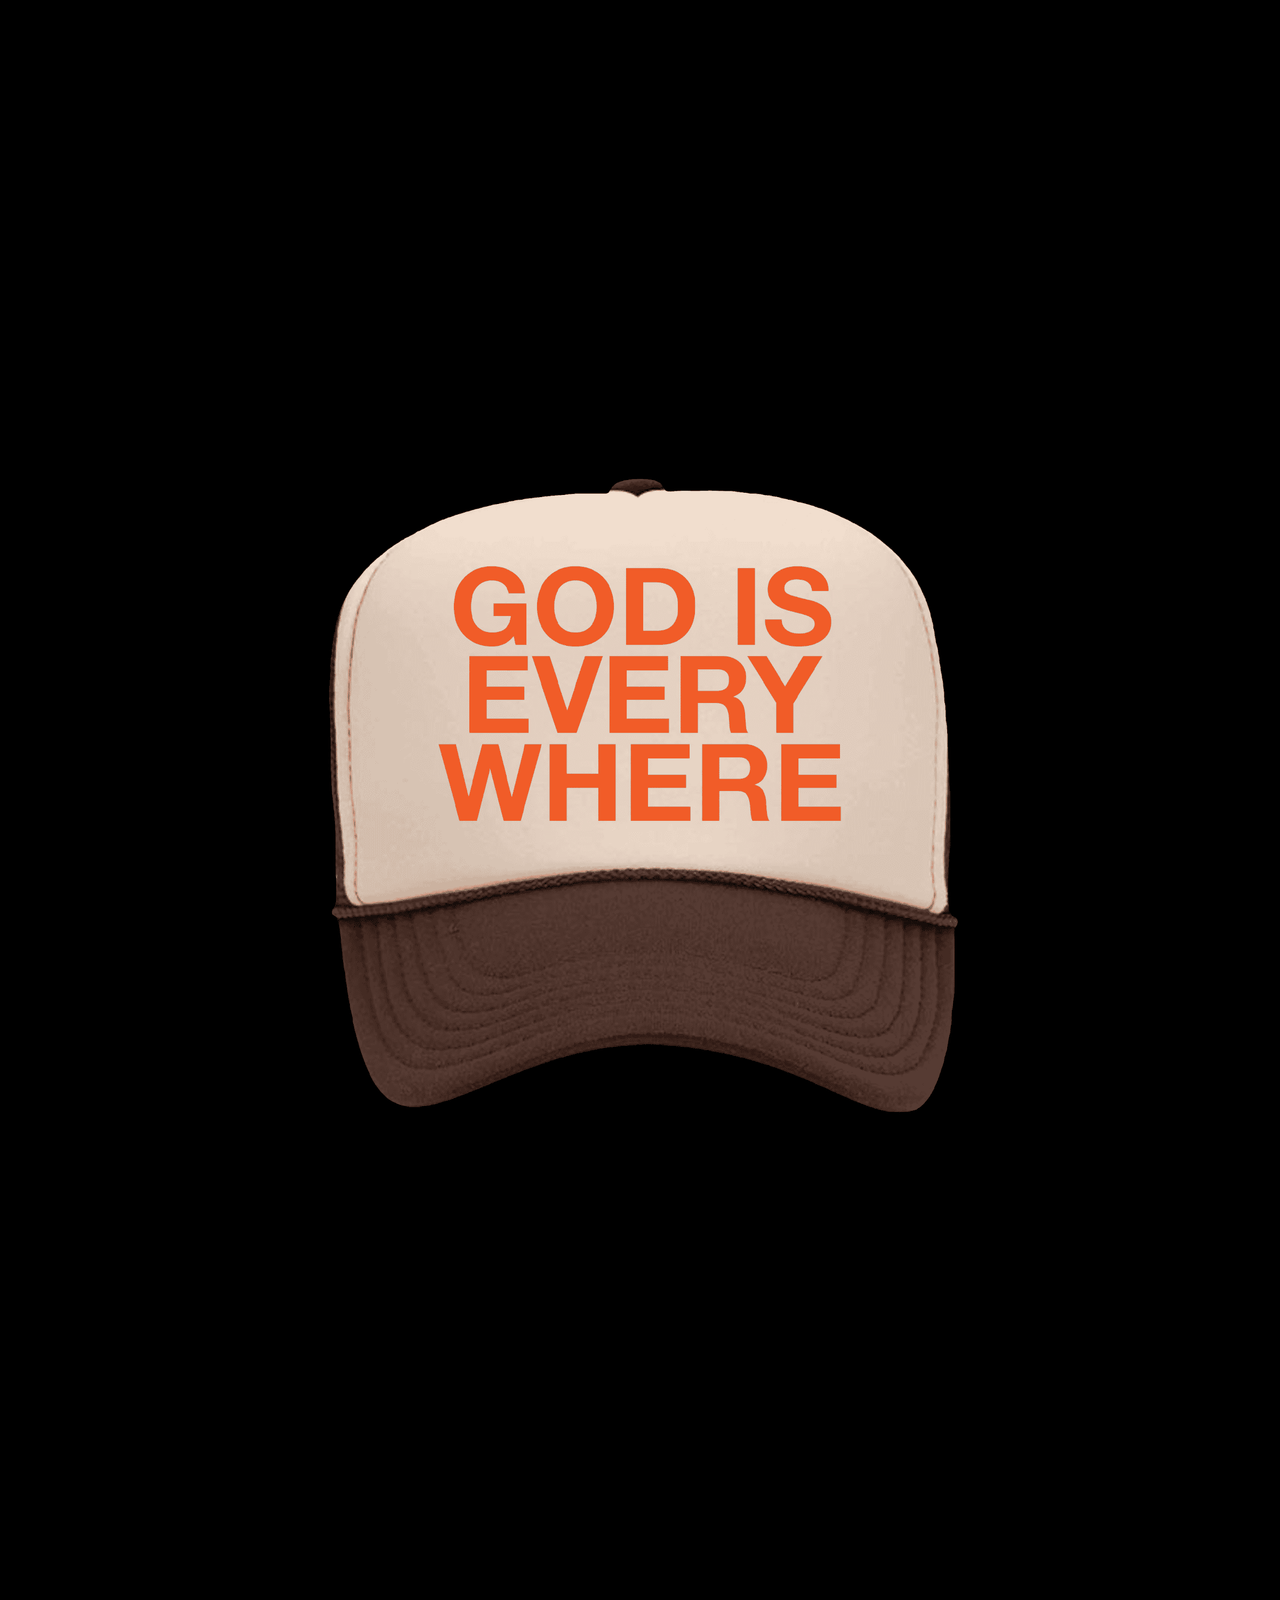 GOD IS EVERYWHERE Trucker hat brown and tan with orange writing. Christian hat by NHIM APPAREL. model portrait holding hat